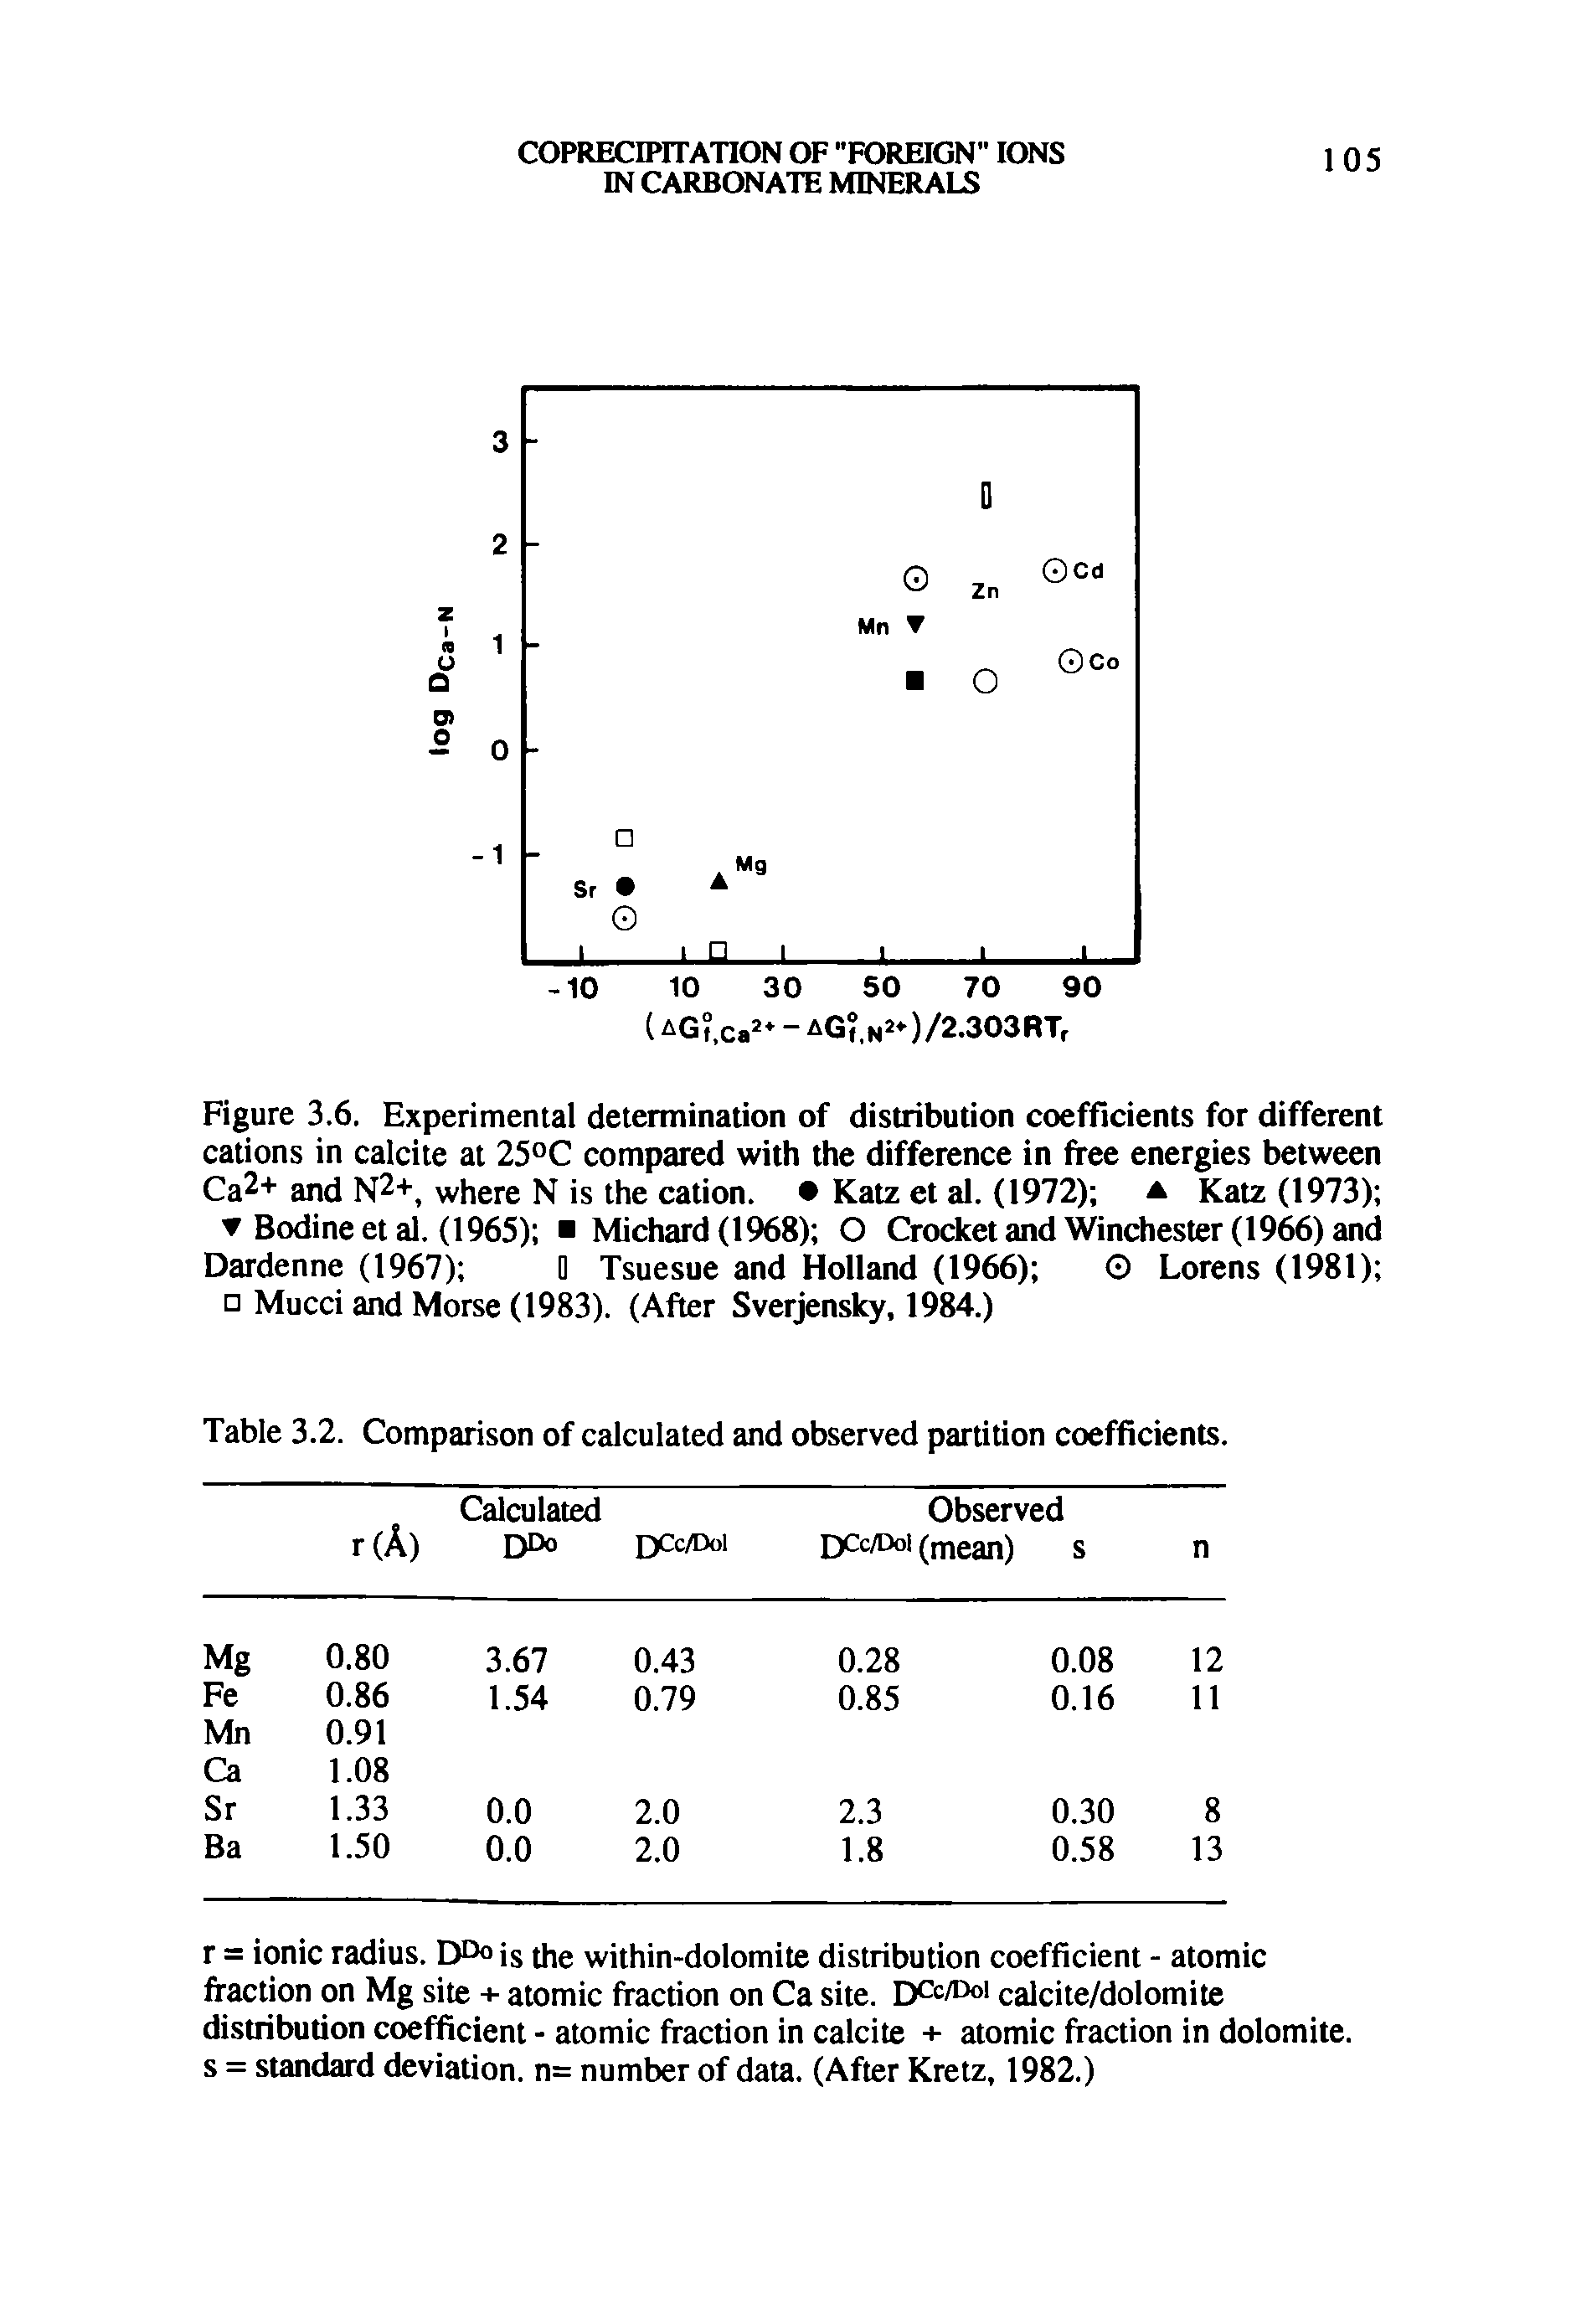 Figure 3.6. Experimental determination of distribution coefficients for different cations in calcite at 25°C compared with the difference in free energies between Ca2+and N2+, where N is the cation. Katz et al. (1972) a Katz (1973) Bodineetal. (1965) Michard(1968) O Crocket and Winchester (1966) and Dardenne (1967) D Tsuesue and Holland (1966) O Lorens (1981) Mucci and Morse (1983). (After Sverjensky, 1984.)...